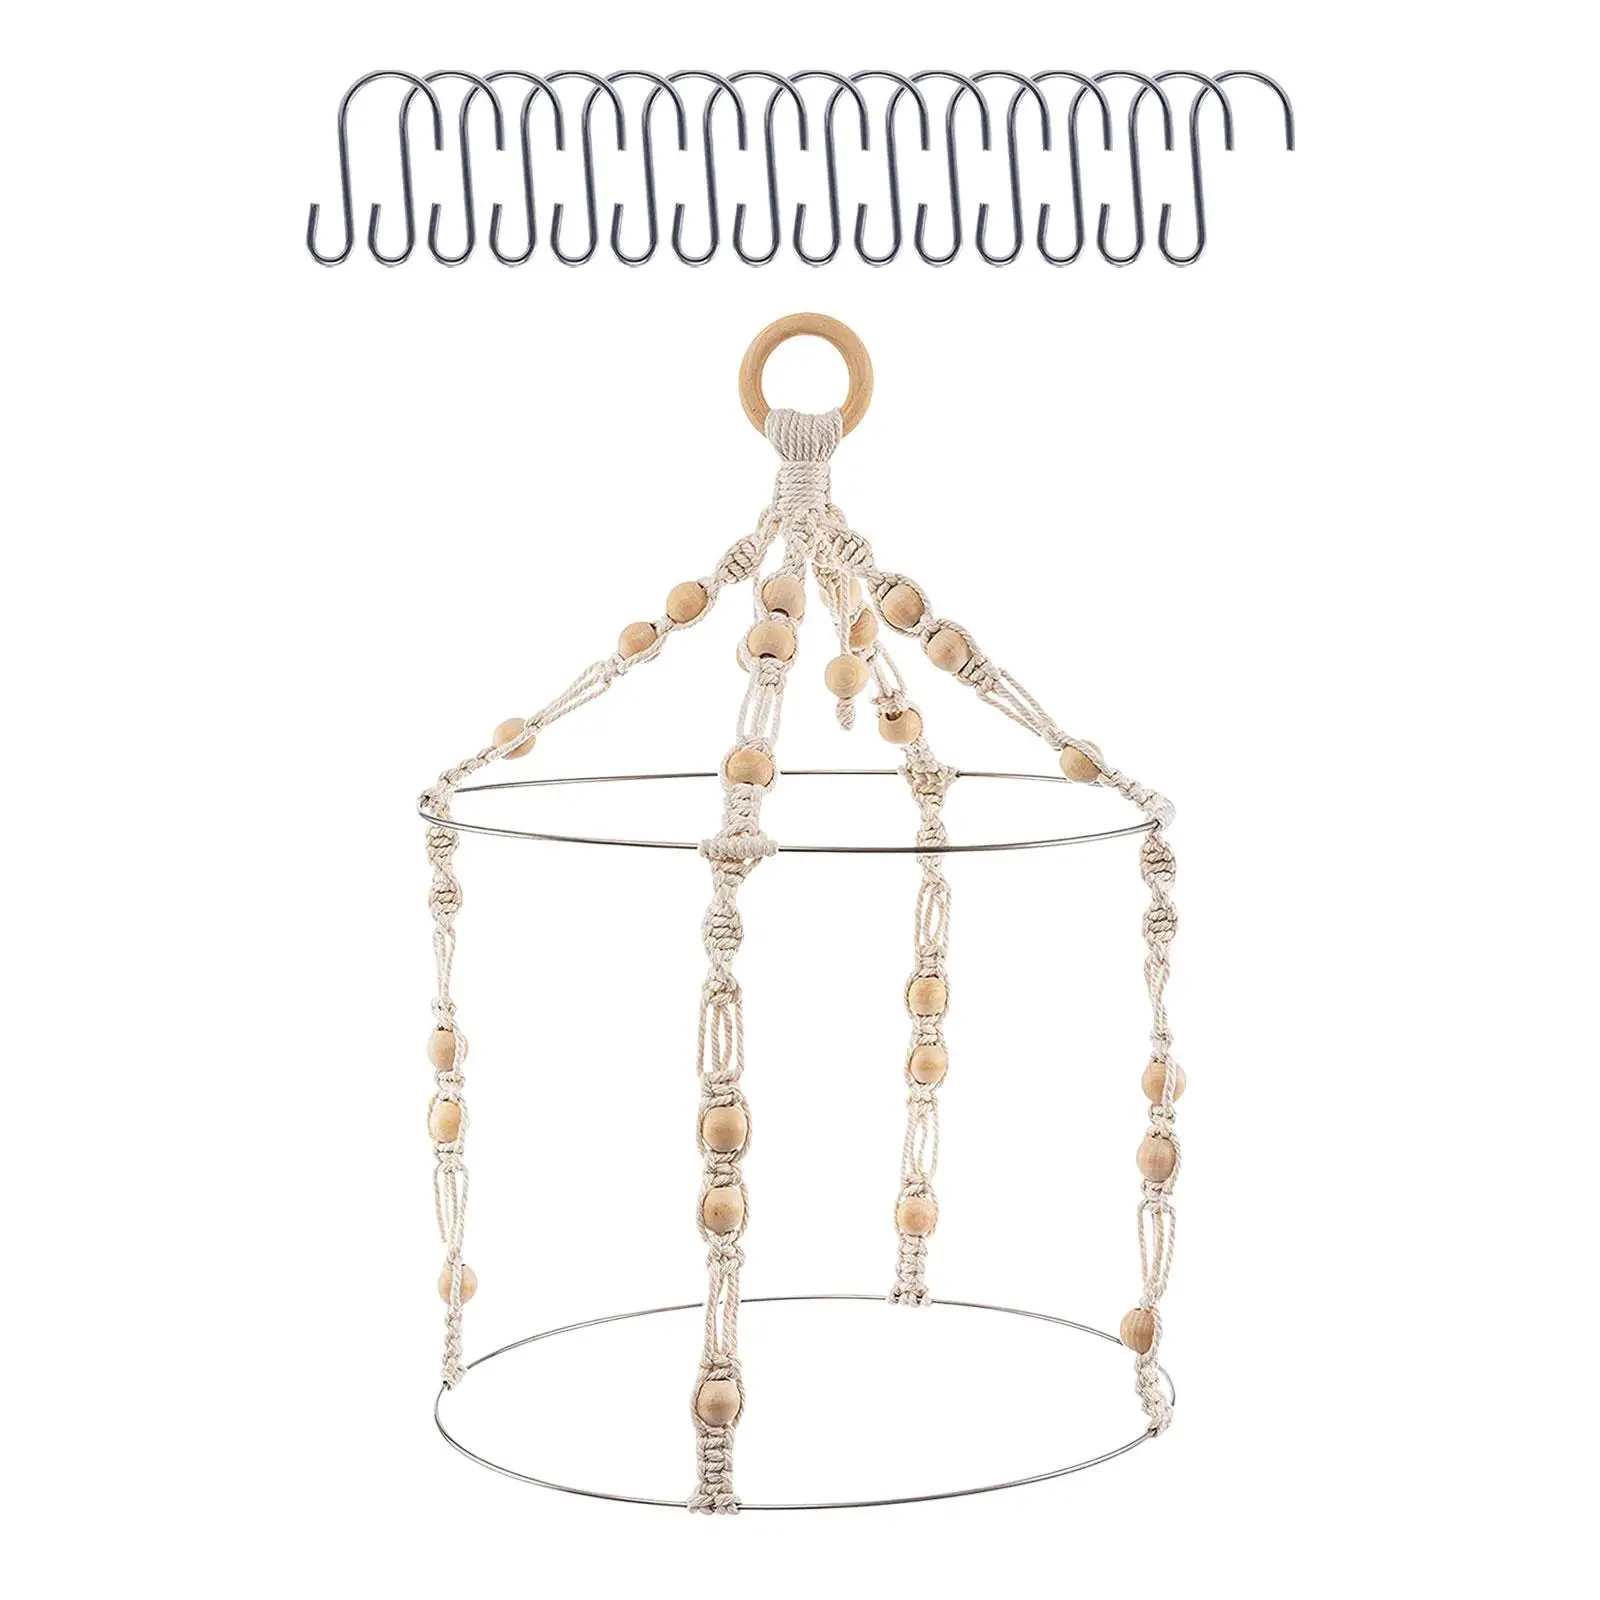 Flower Drying Hanger Hand Woven Rope Sturdy Plants Drying Rack Hanging Drying Rack for Plants for Drying Plants Flowers Buds